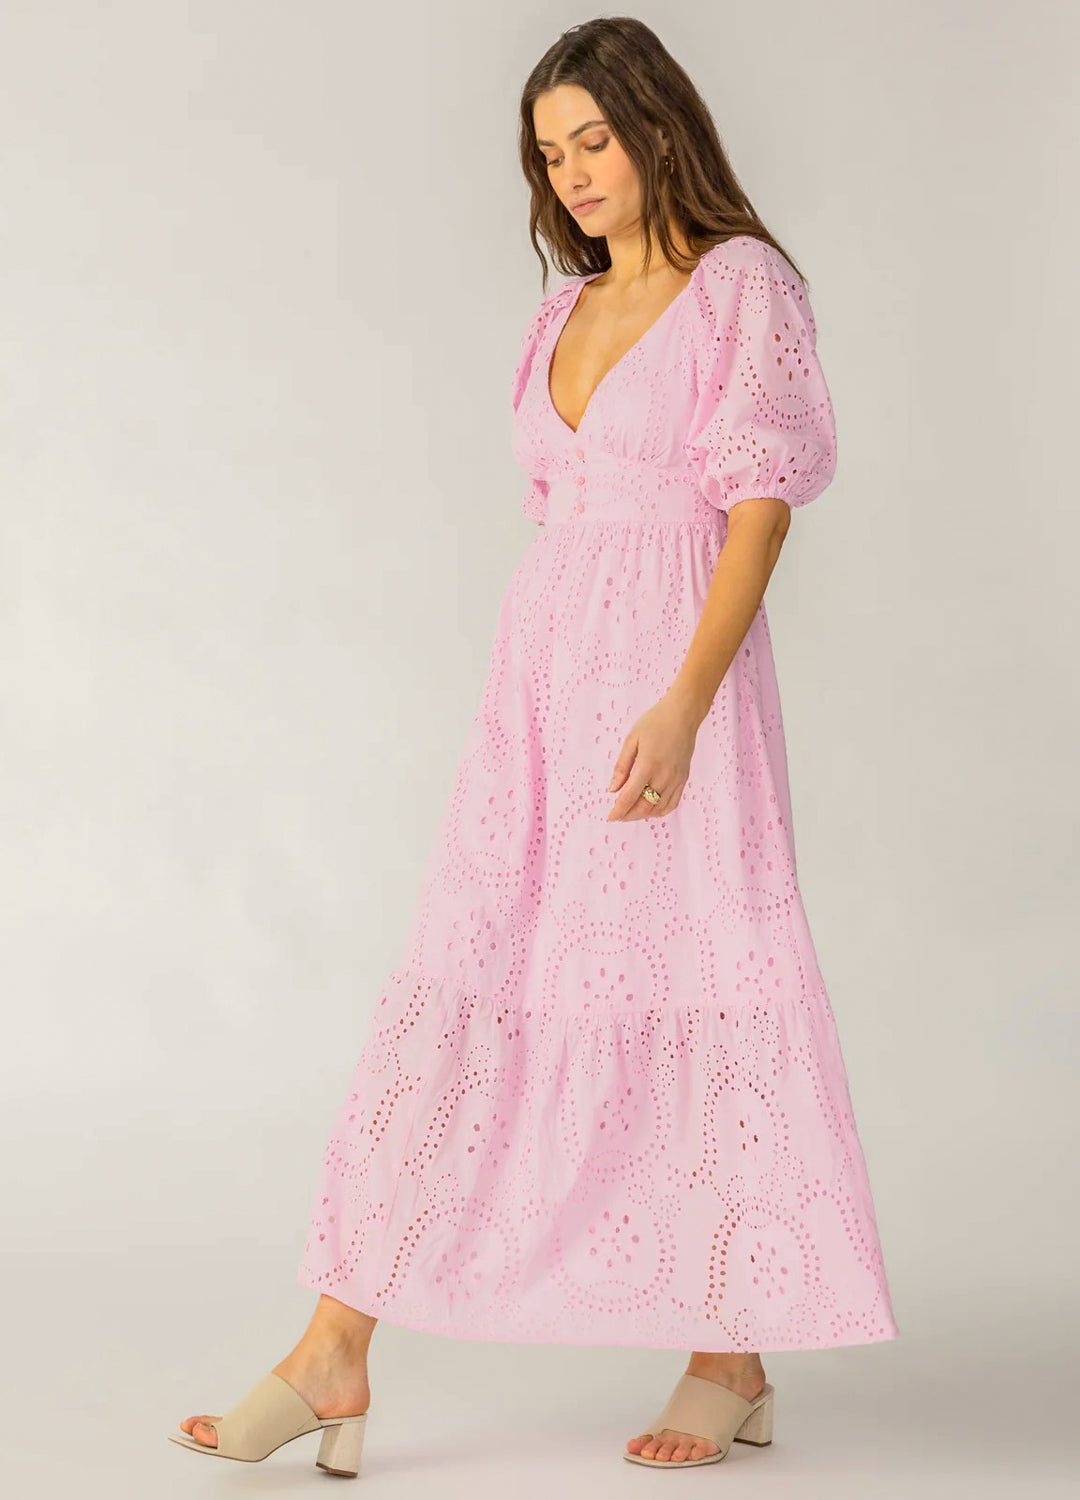 Sanctuary Maxi Eyelet Dress in Pink made from cotton at Inner Beach Co, Toronto, Ontario, Canada